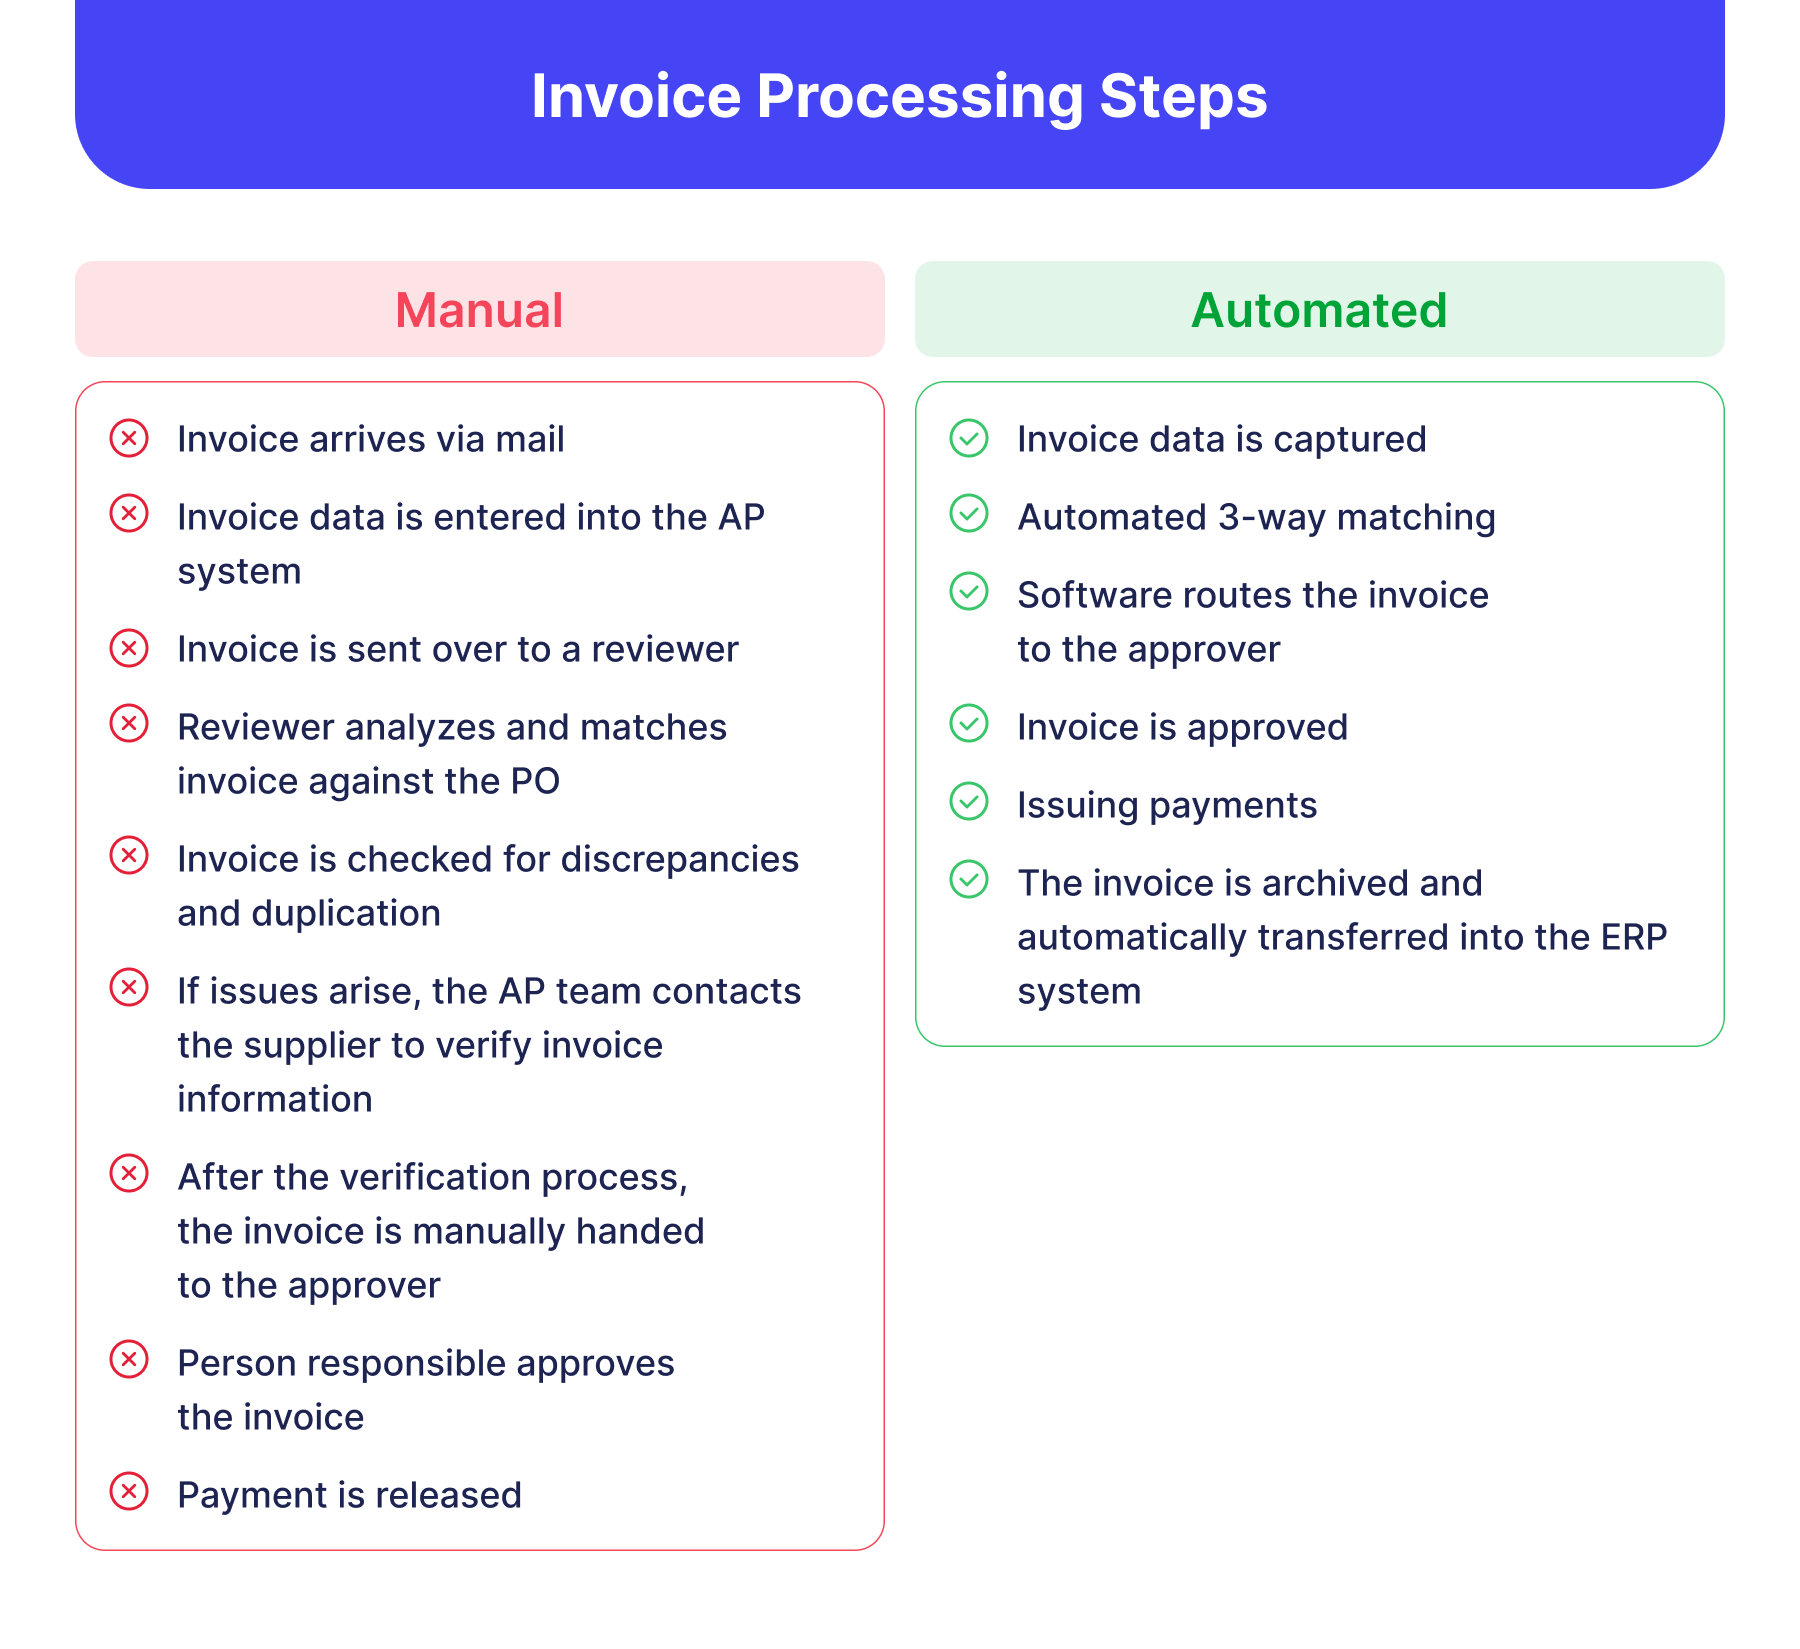 manual vs automated invoice processing steps